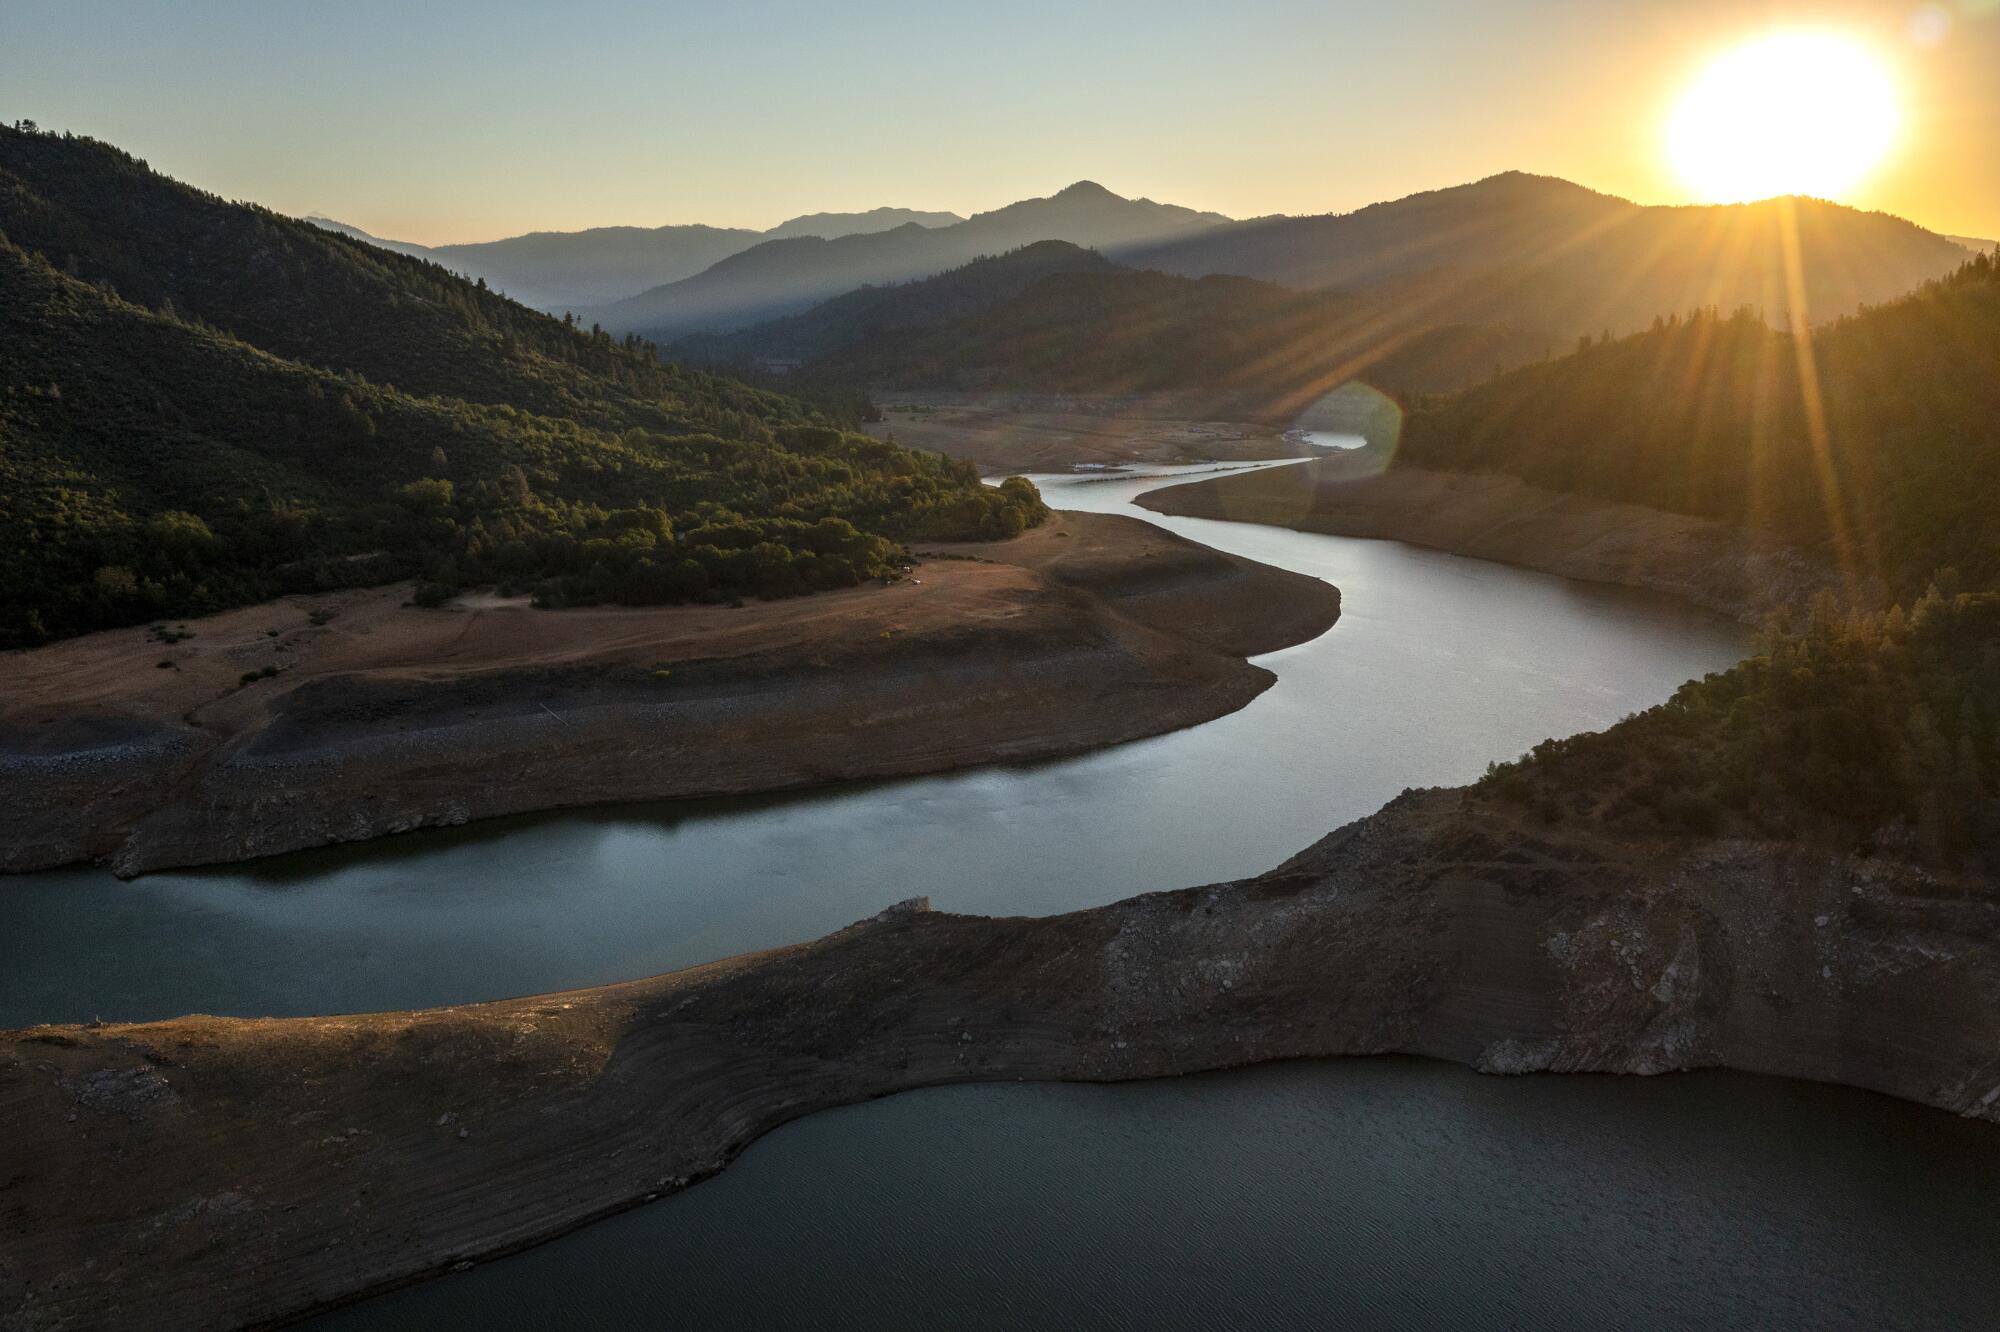 Water levels at Lake Shasta are lower as drought conditions persist.